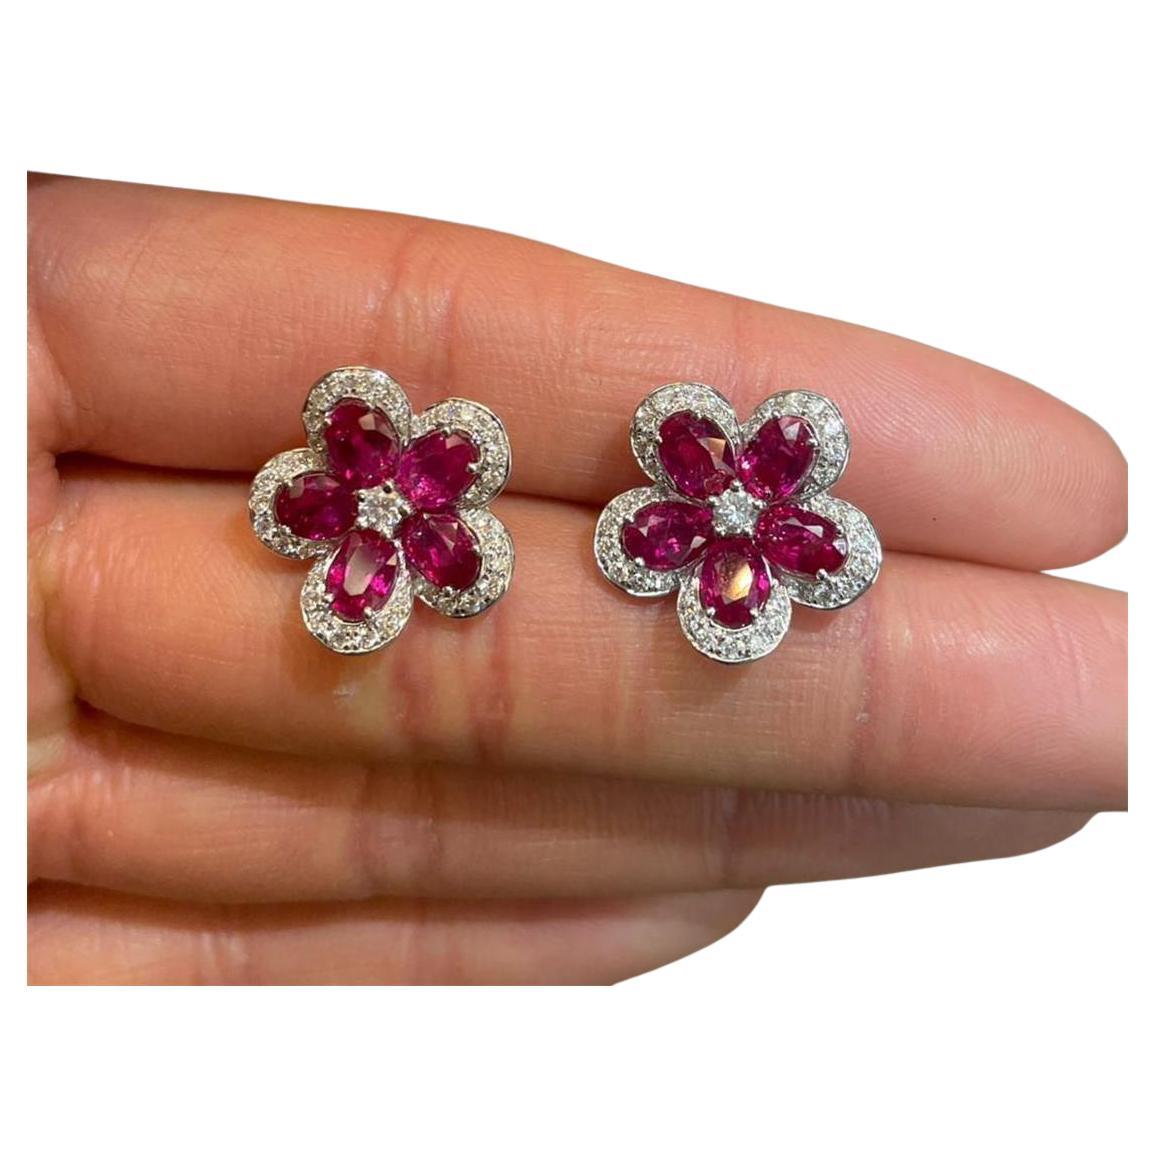 NWT $23, 500 18KT Gold Gorgeous 6CT Natural Ruby Diamond Floral Flower Earrings